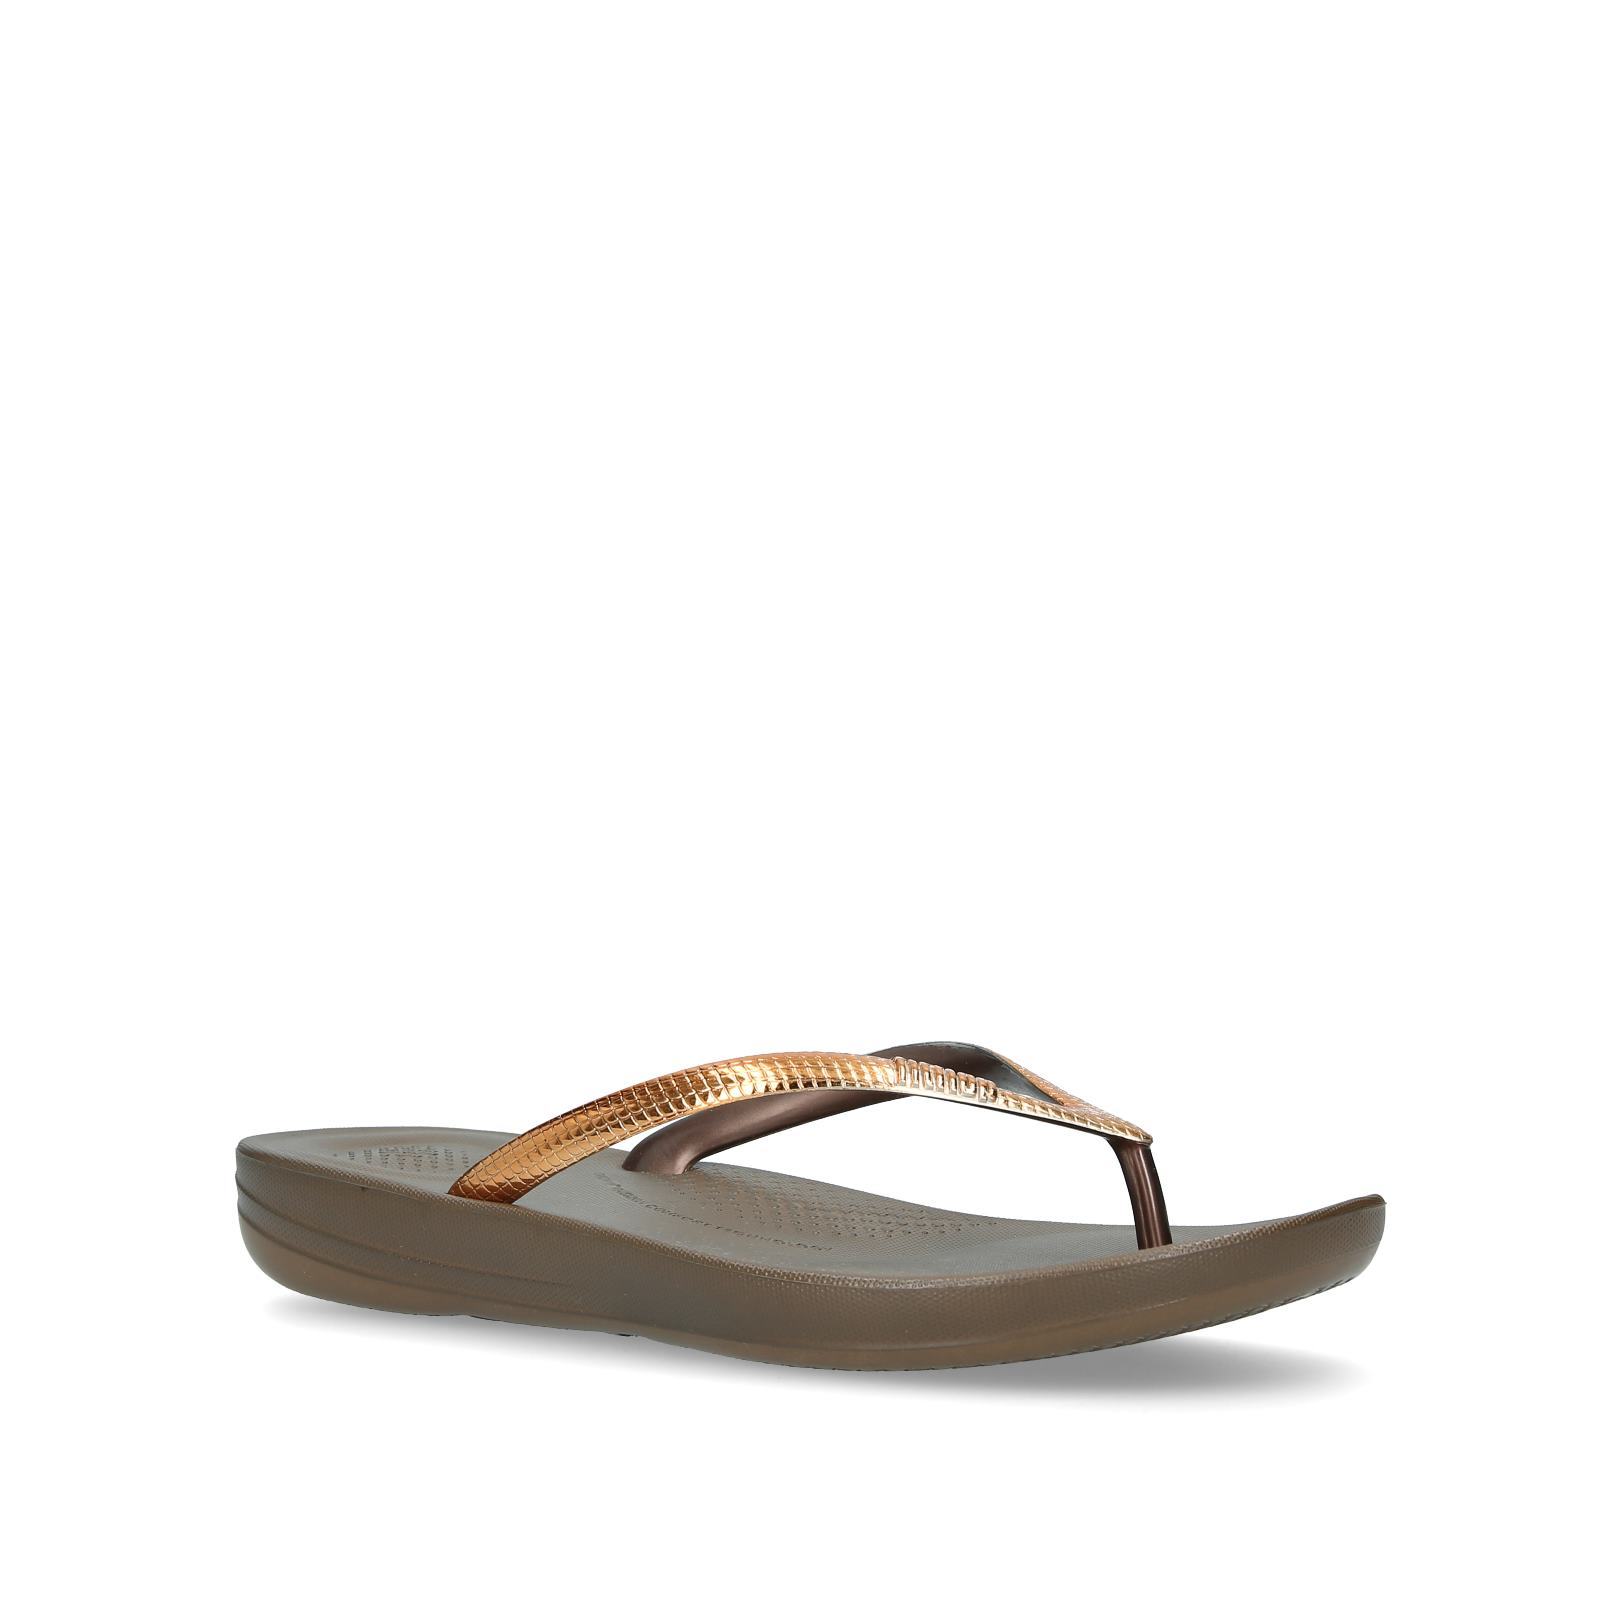 M17 IQUSHION MIRROR - FITFLOP Summer